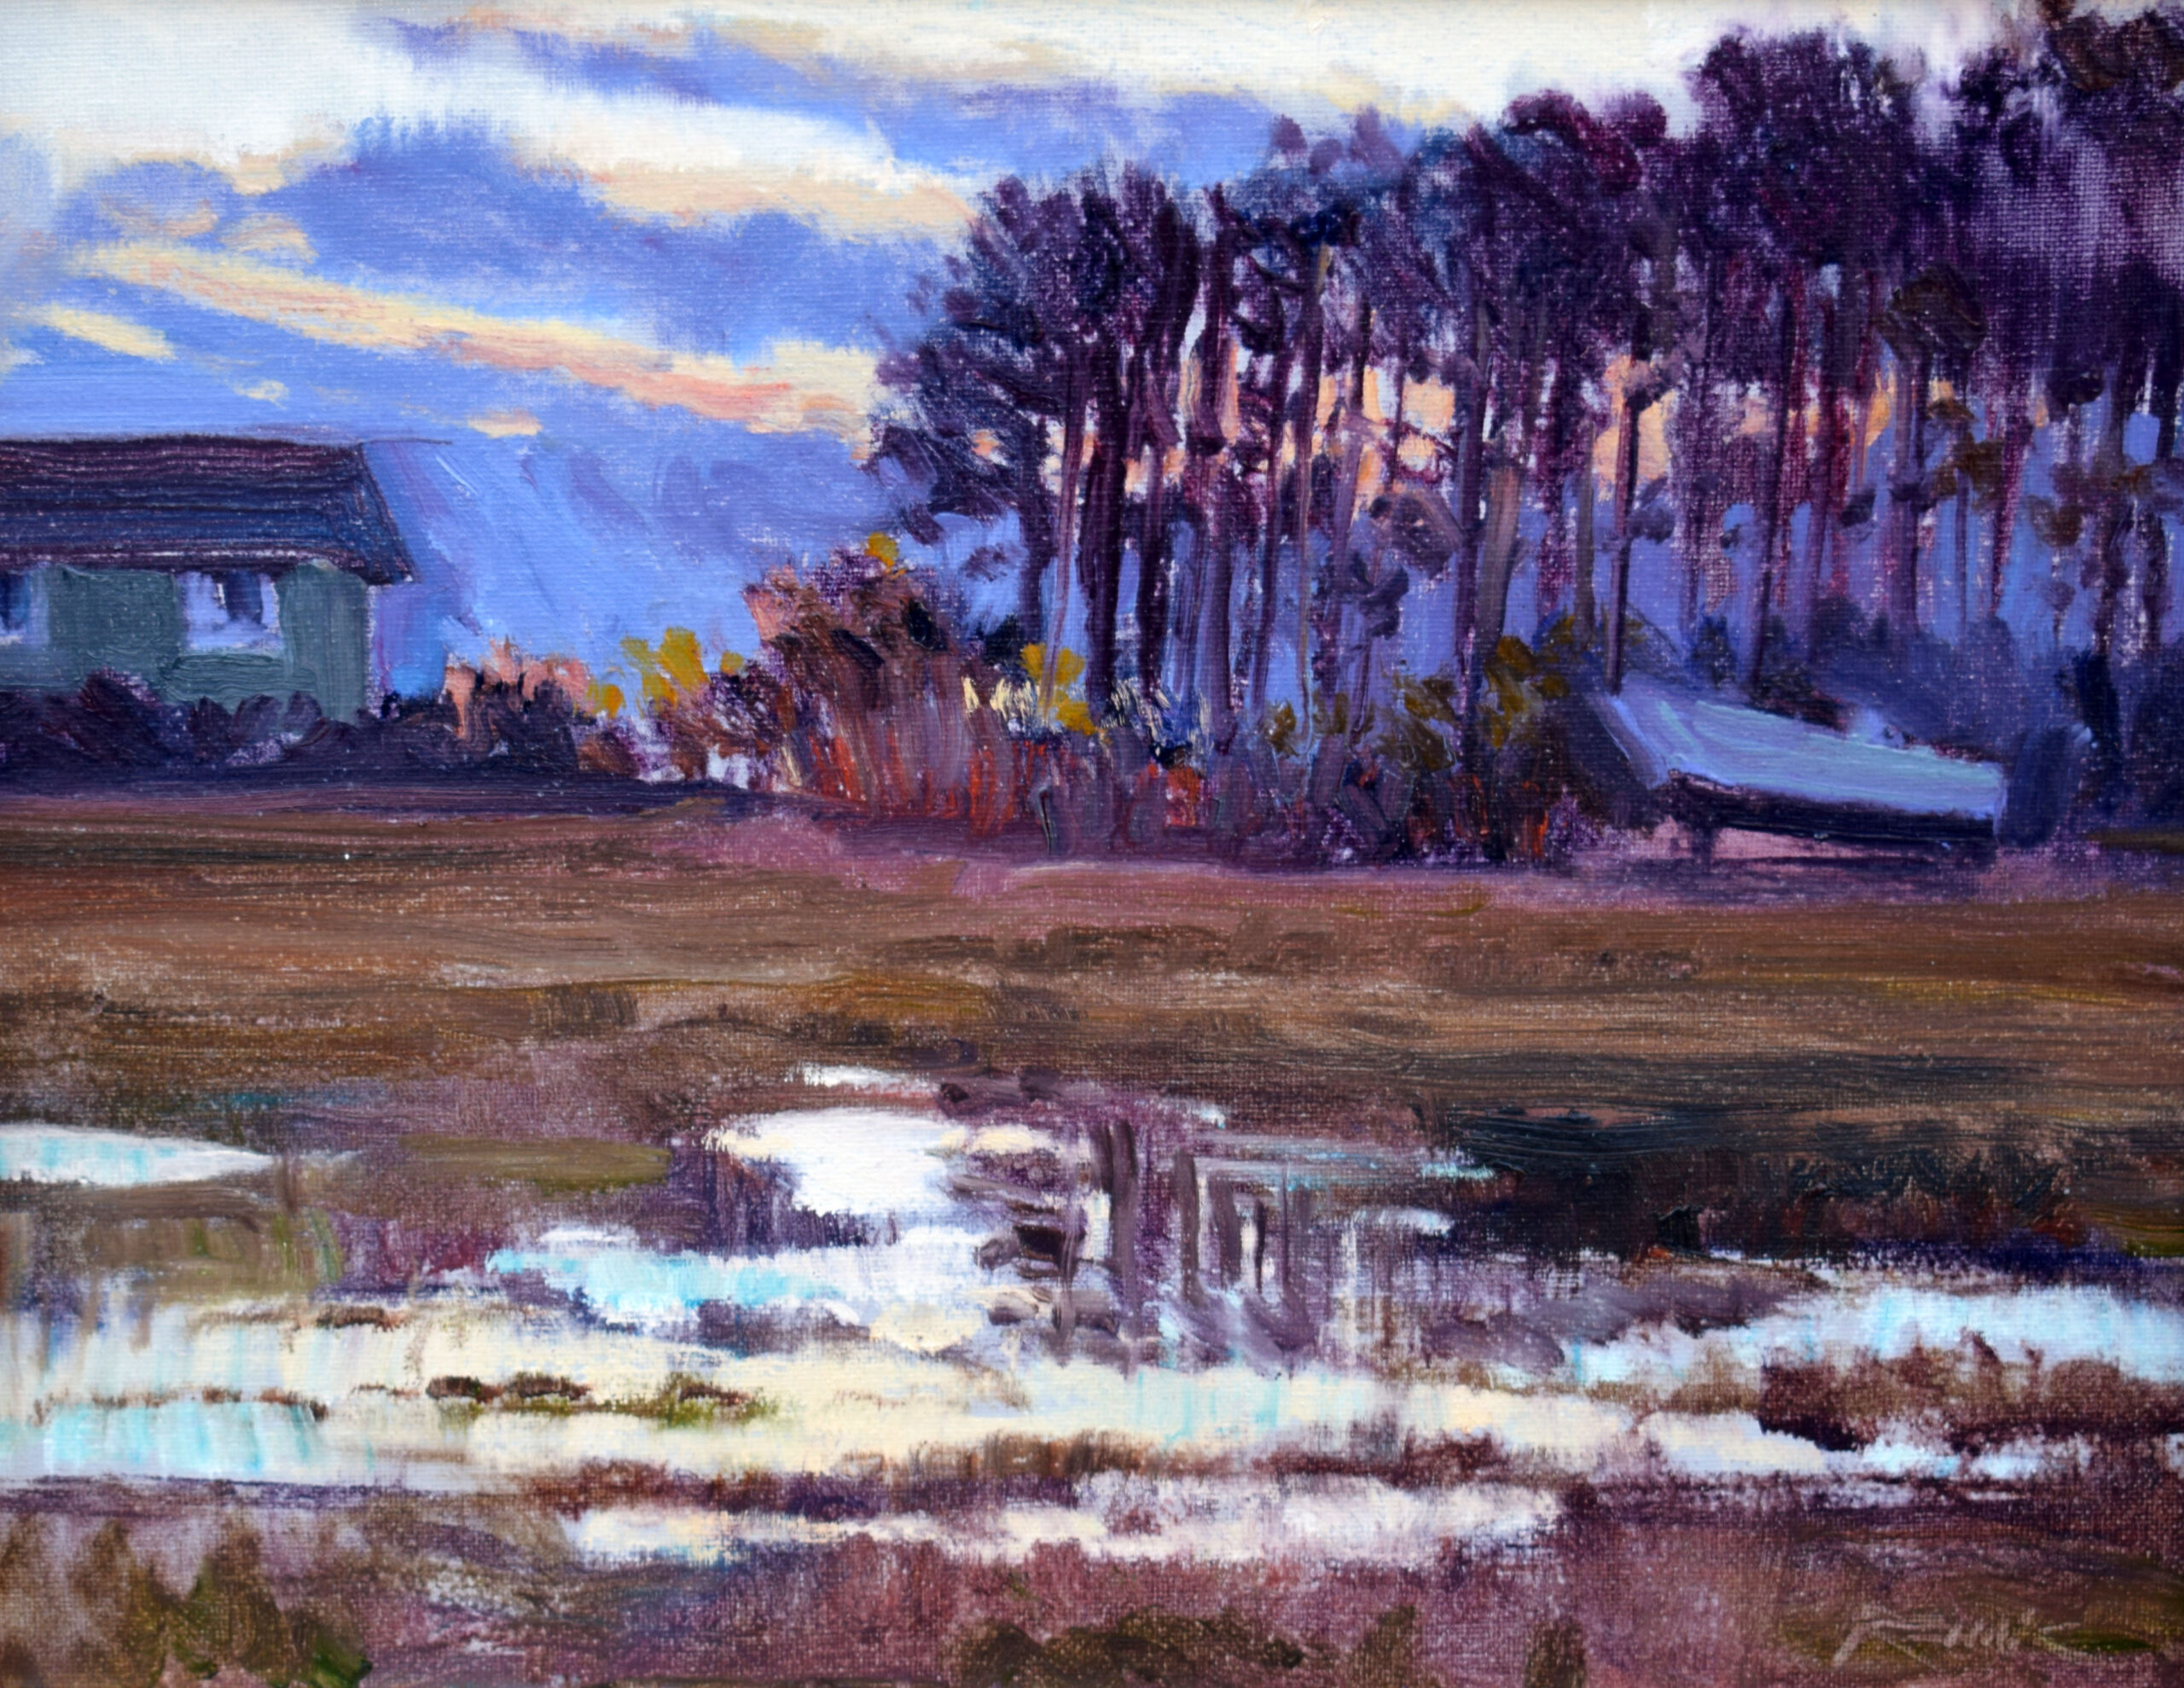 Eastern Shore Puddles
oil
11″ x 14″
$720